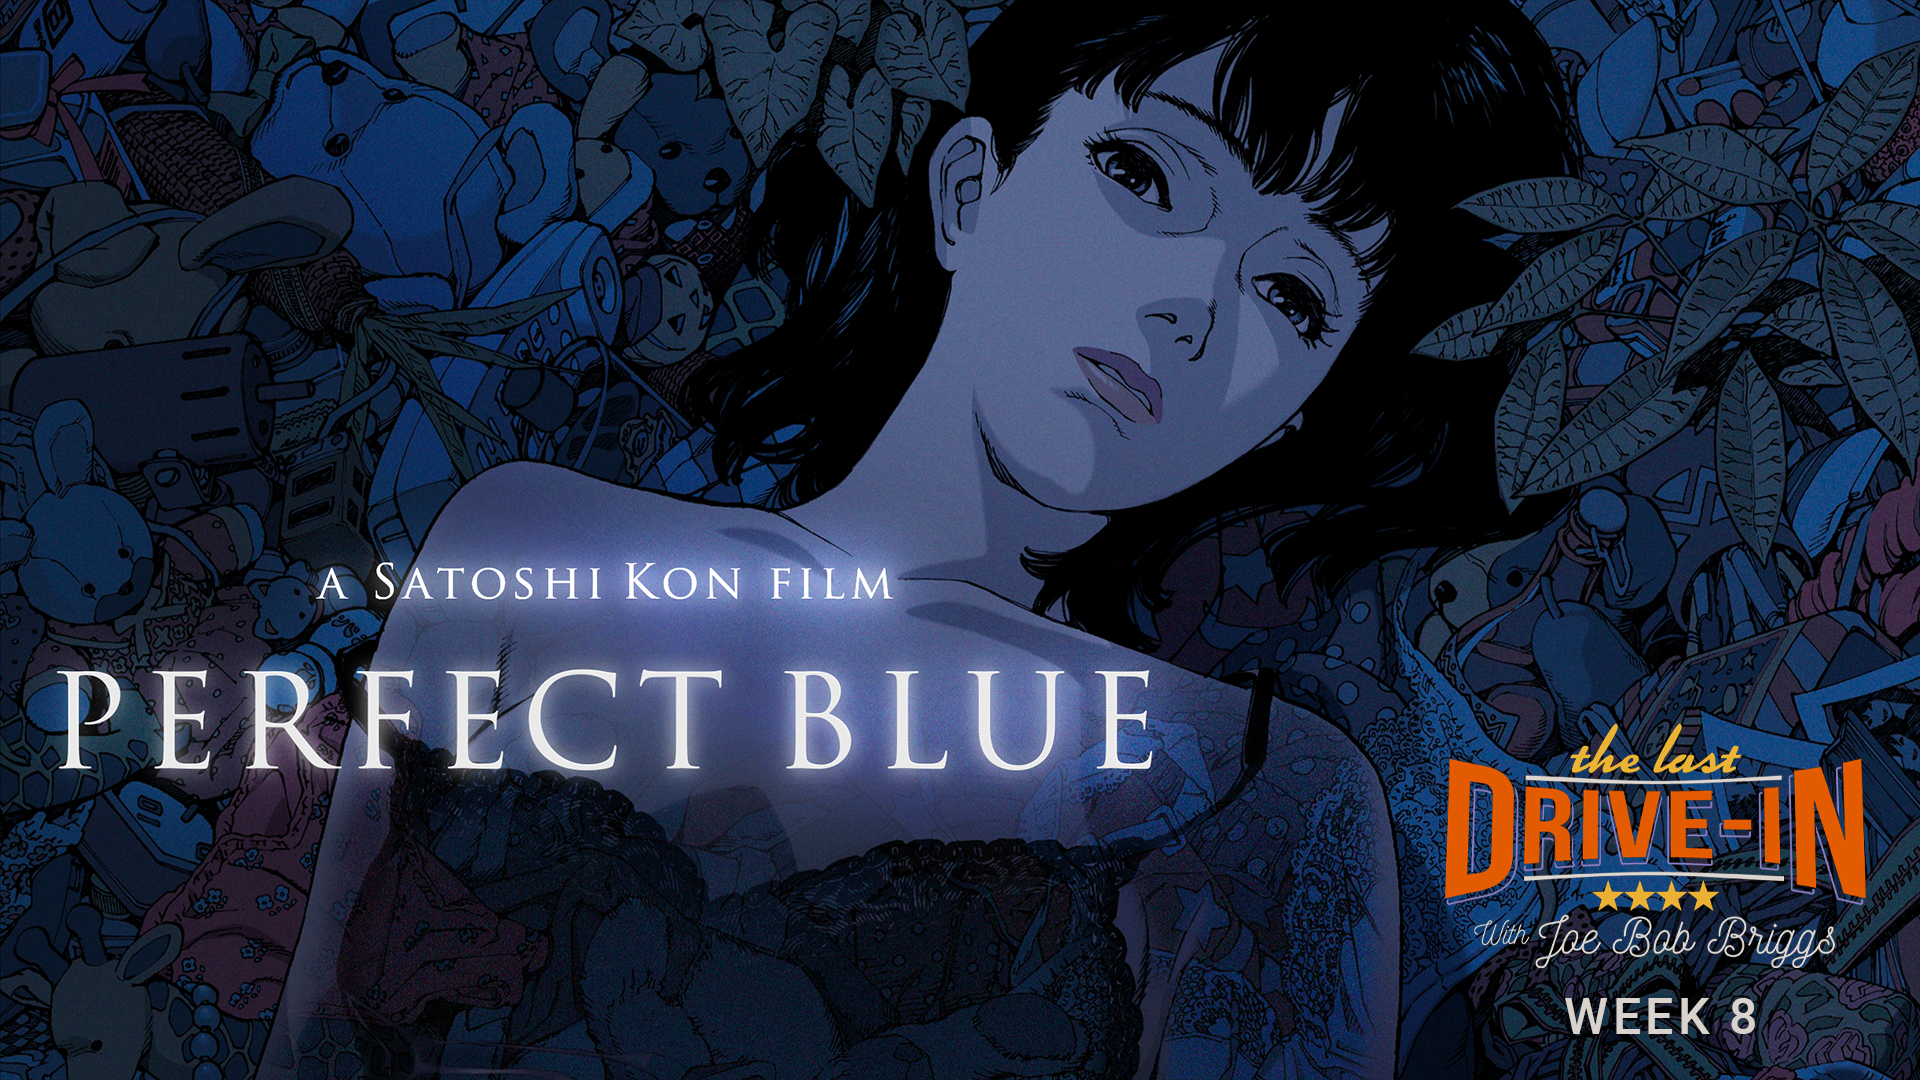 Week 8: Perfect Blue, Mima fears she may be losing sanity as art and reality blur., TV-MA, Season 1062609, Episode 16